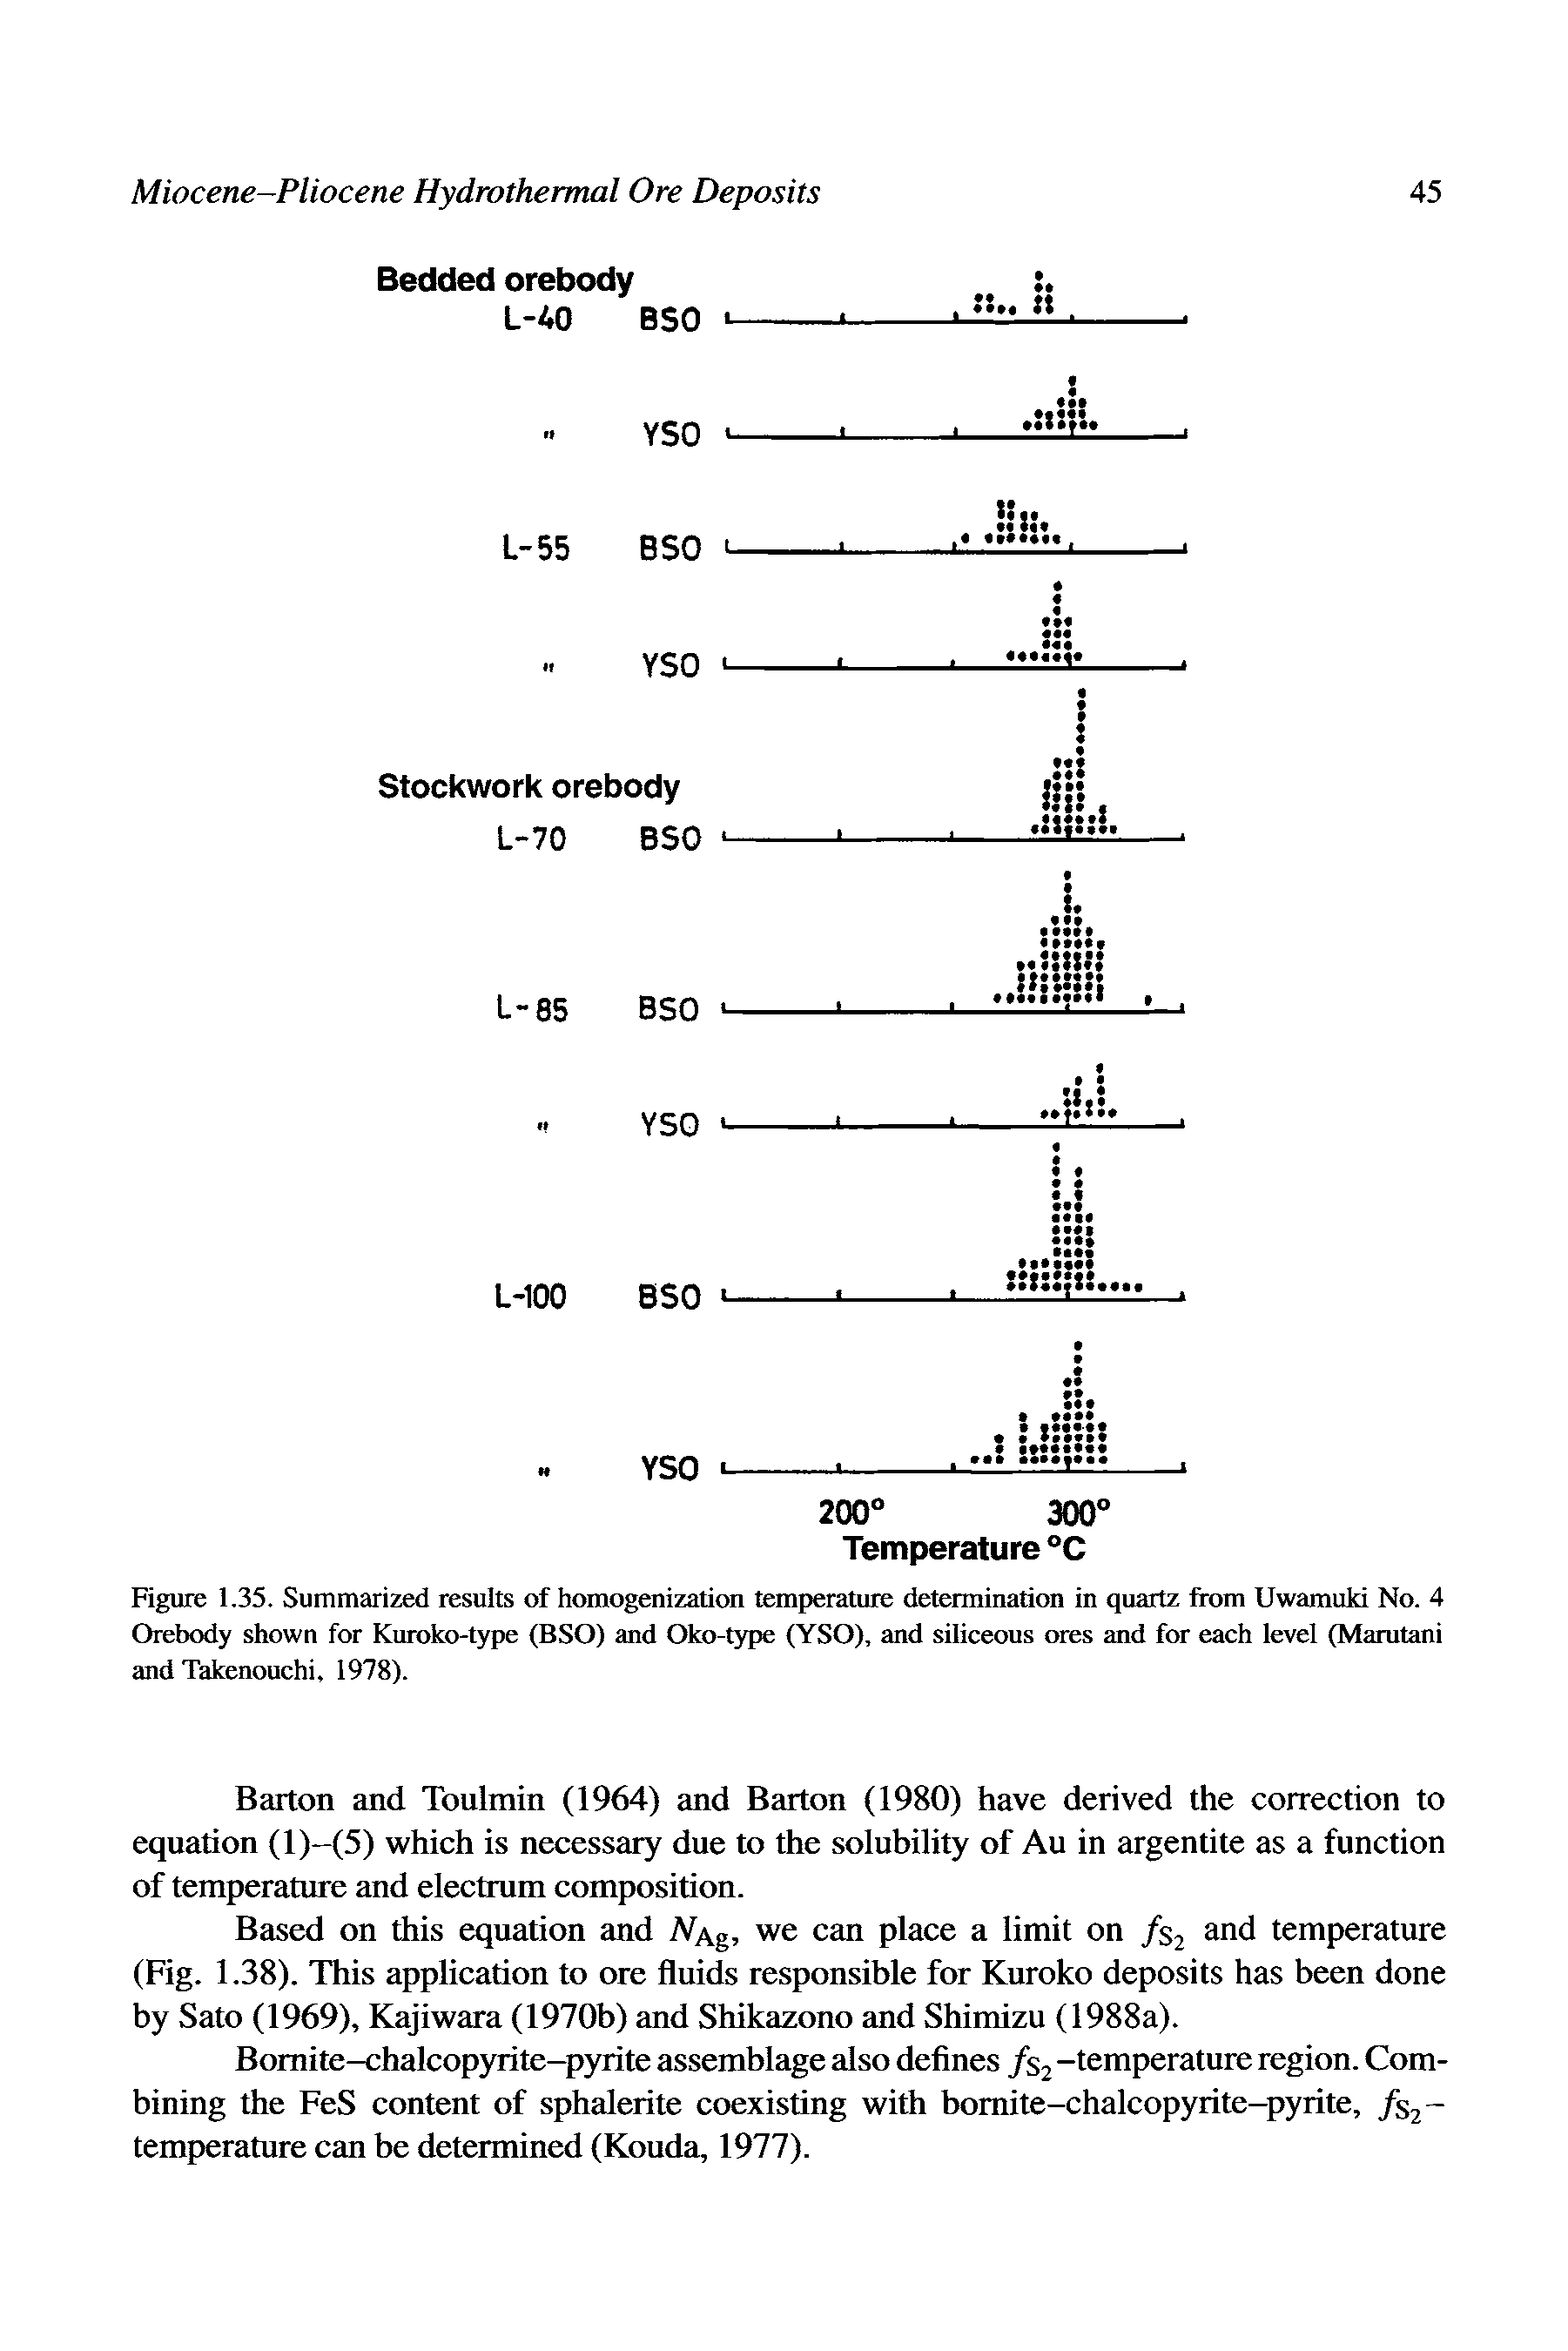 Figure 1.35. Summarized results of homogenization temperature determination in quartz from Uwamuki No. 4 Orebody shown for Kuroko-type (BSO) and Oko-type (YSO), and siliceous ores and for each level (Marutani and Takenouchi, 1978).